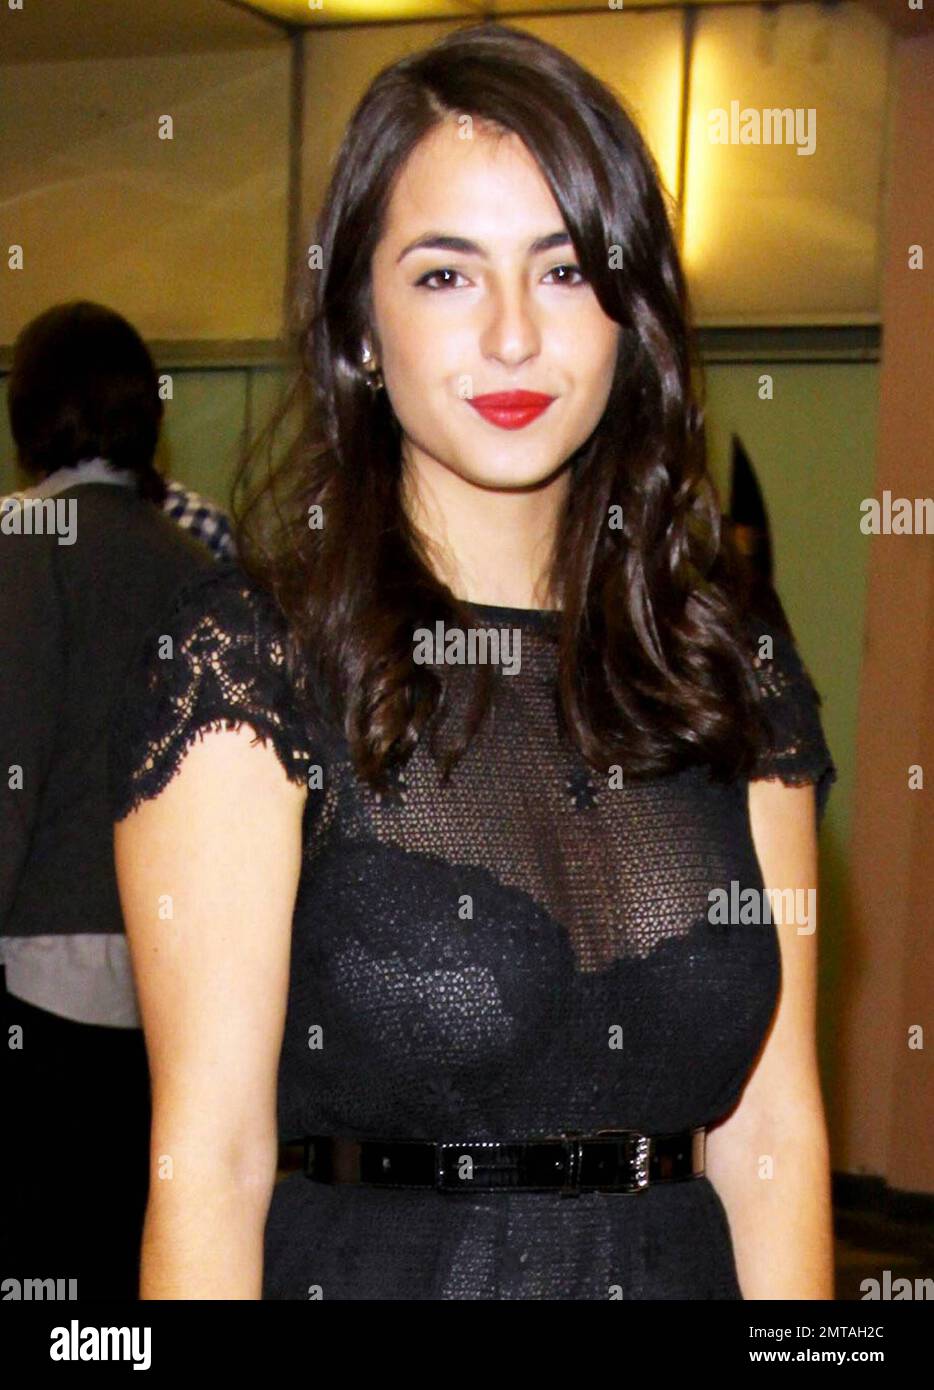 Alanna Masterson arrives at the premiere of 'Peach Plum Pear' held at Regent Showcase Cinema during the Hollywood Reel Film Festival.  'Peach Plum Pear' stars Alanna, sister of 'That '70s Show' actor Danny Masterson. Los Angeles, CA. 12/16/10. Stock Photo